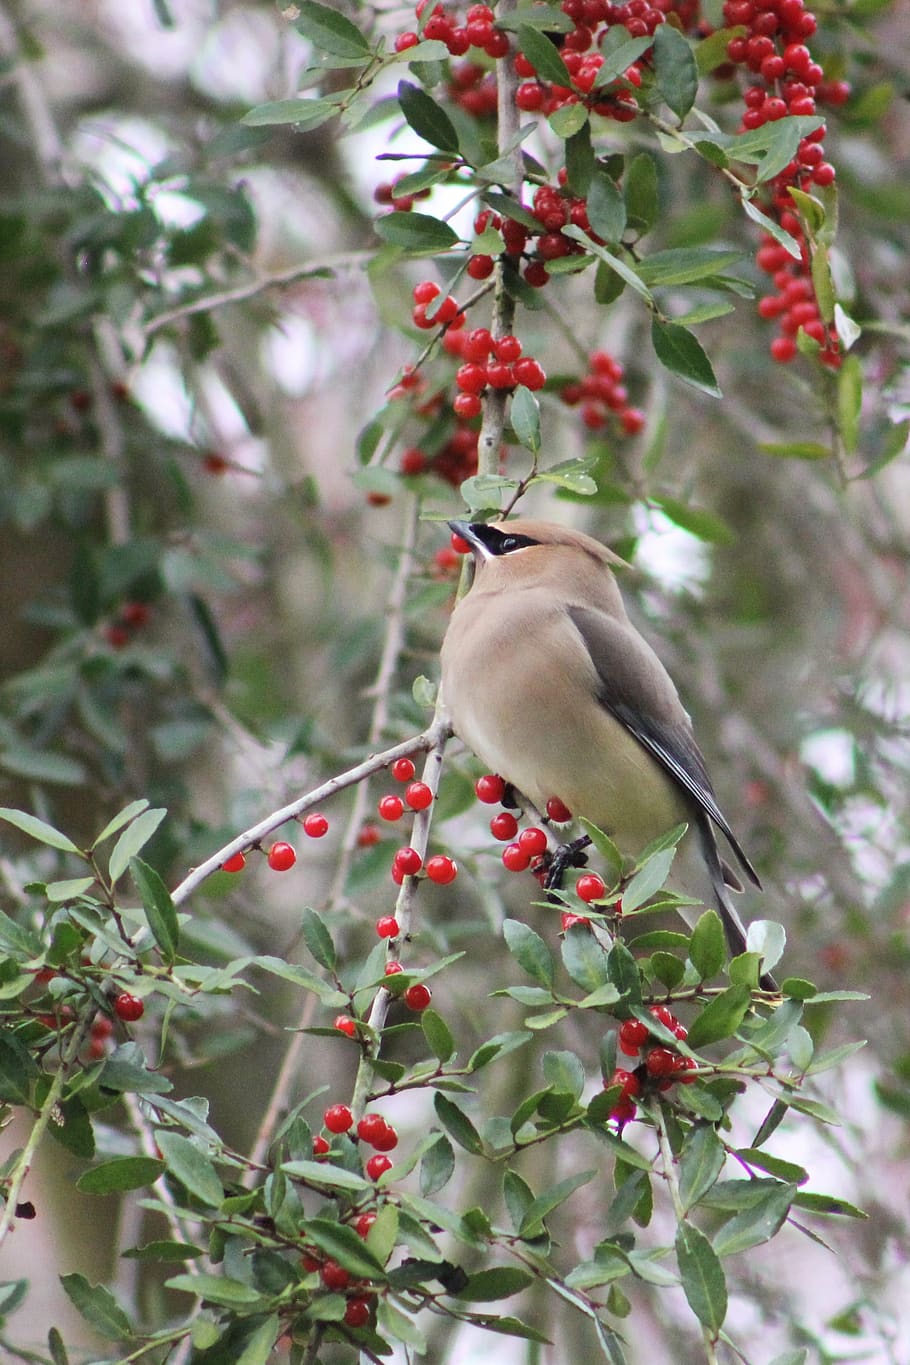 cedar waxwing, bird, waxwing, nature, wild, perched, wildlife, wing, tree, ornithology